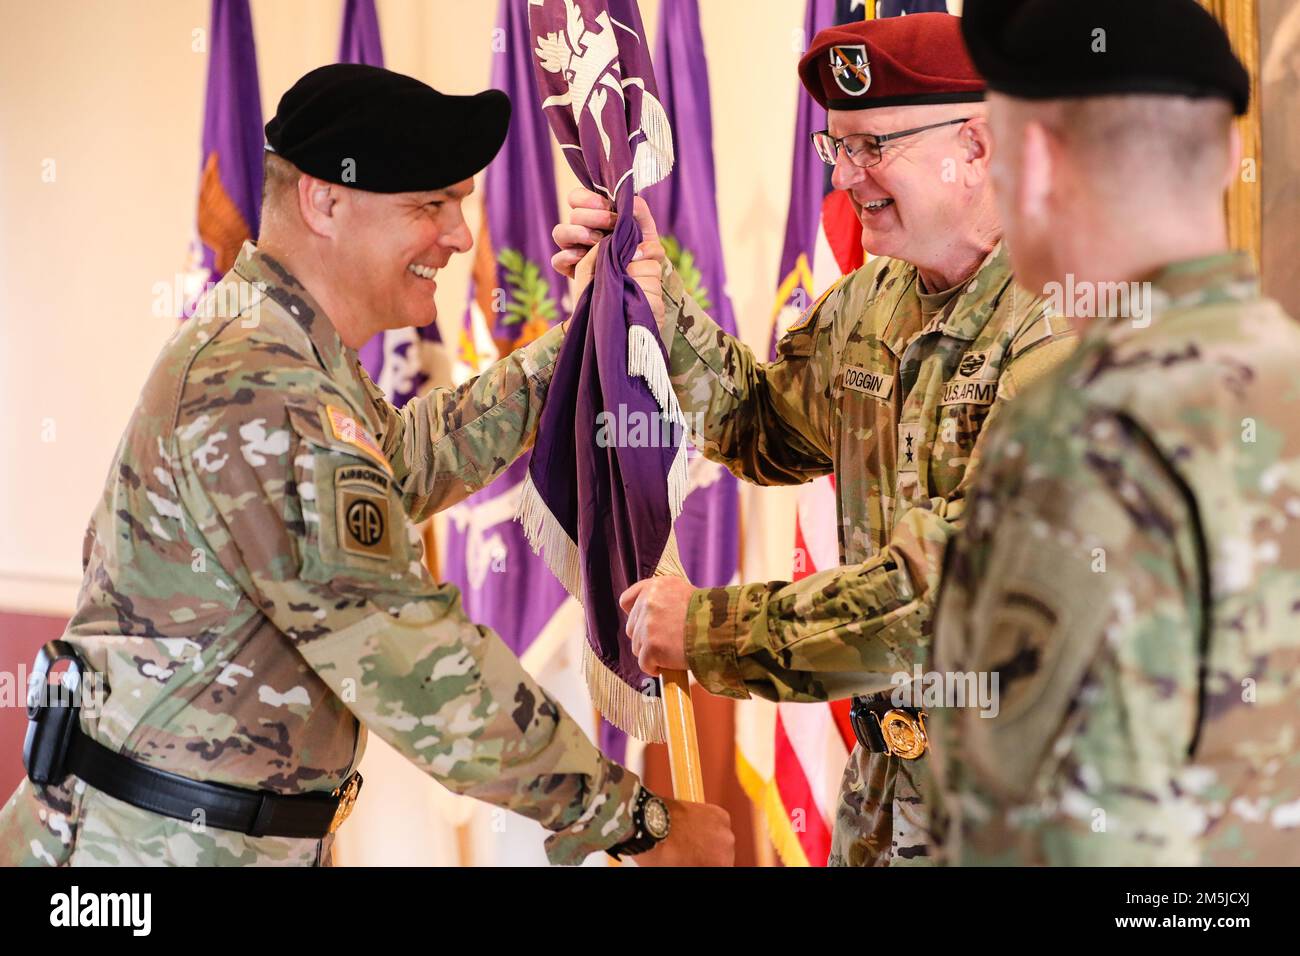 Brig. Gen Timothy Brennan, left, the outgoing commander of the 353rd Civil Affairs Command, passes a unit guidon to Maj. Gen. Jeffrey Coggin, commanding general of U.S. Army Civil Affairs and Psychological Operations Command, during a change of command ceremony at Fort Hamilton, N.Y., March 19, 2022. During the ceremony Brig. Gen Timothy Brennan relinquished command to Brig. Gen. Dean Thompson. Stock Photo